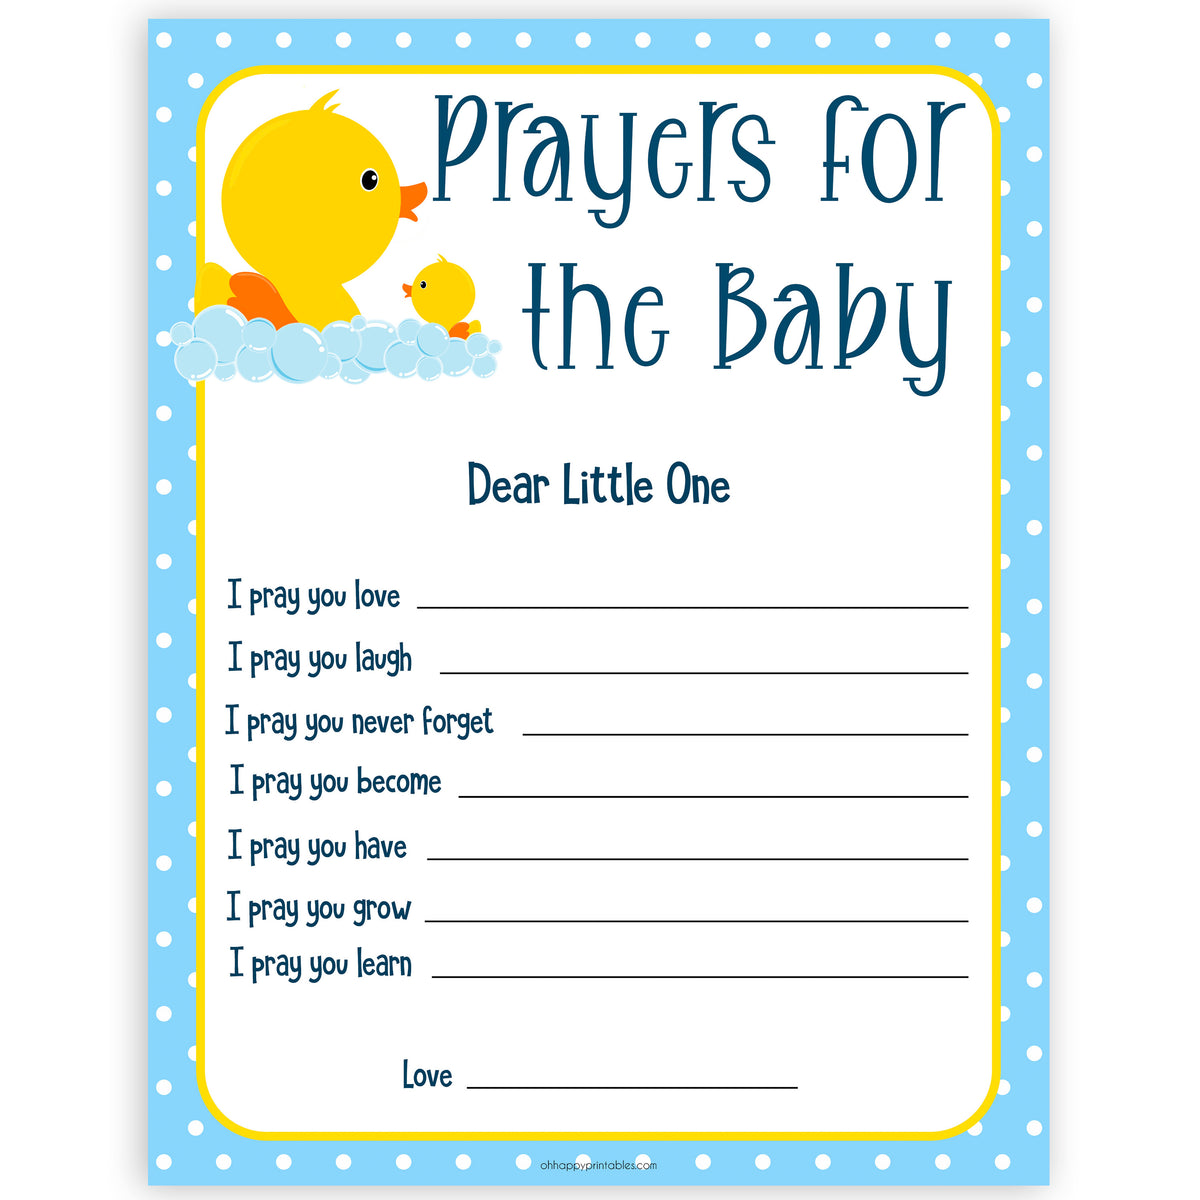 prayers-for-the-baby-keepsake-rubber-ducky-printable-baby-games-n